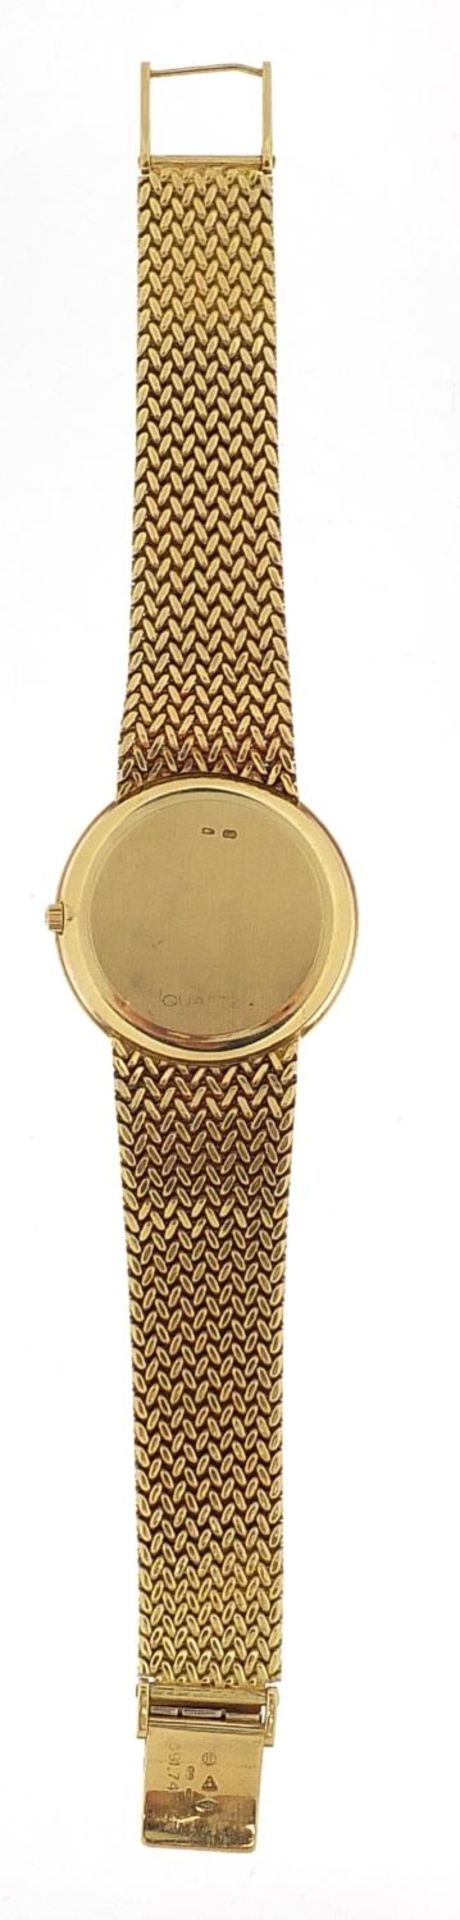 Omega, 18ct gold gentlemen's wristwatch with 18ct gold strap, 31mm in diameter, 71.4g - this lot - Image 4 of 7